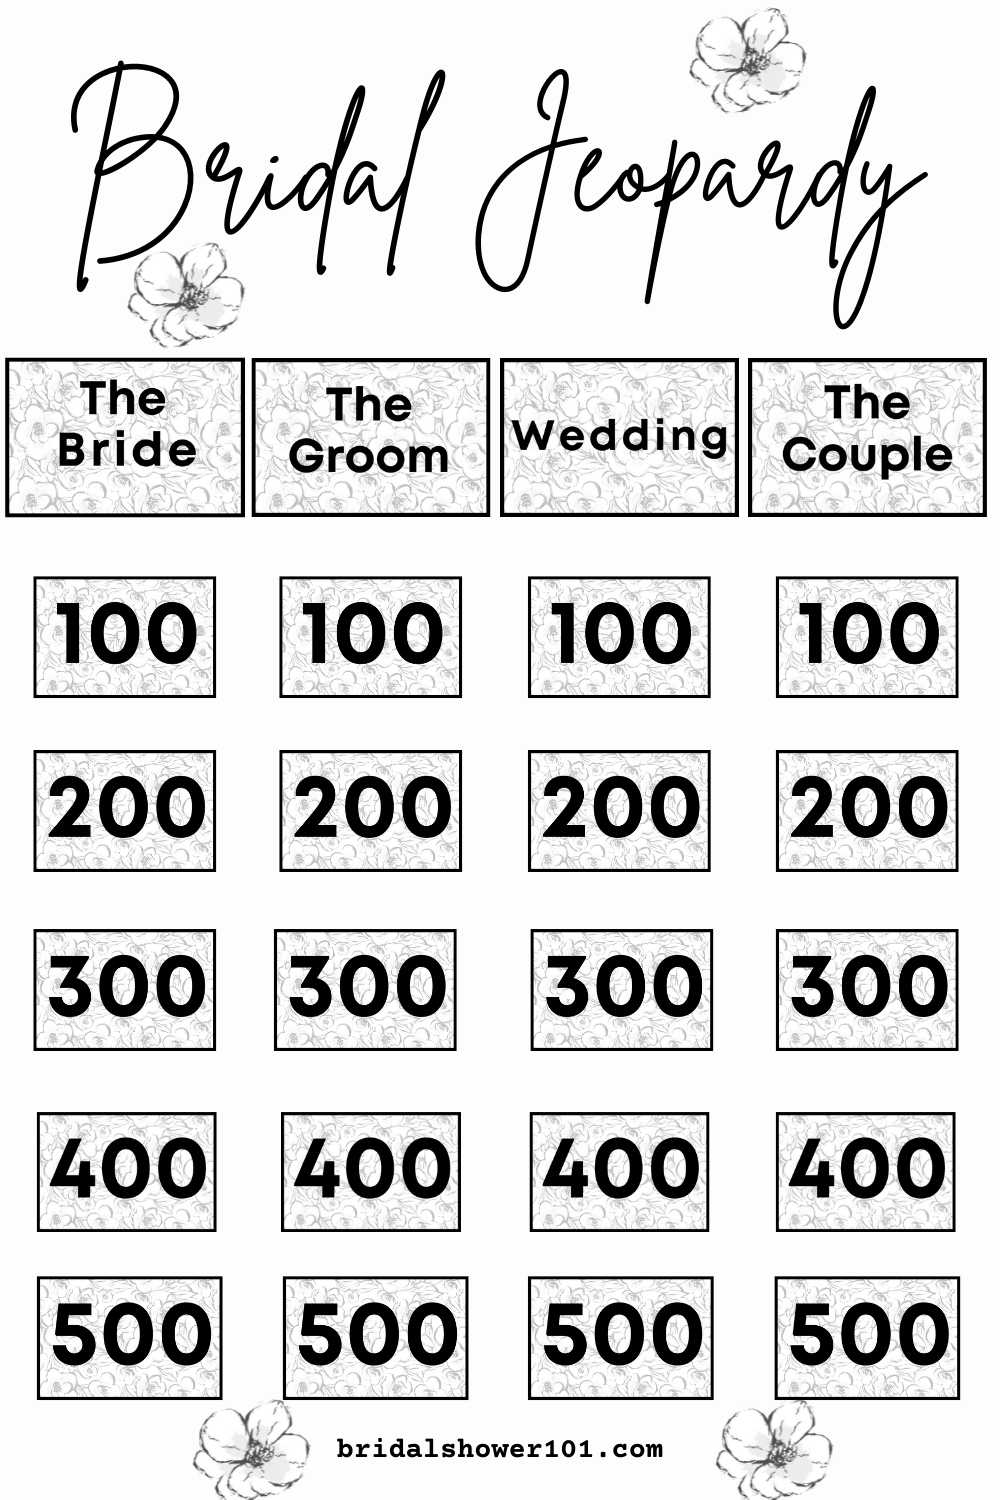 77-bridal-jeopardy-questions-free-game-included-bridal-shower-101